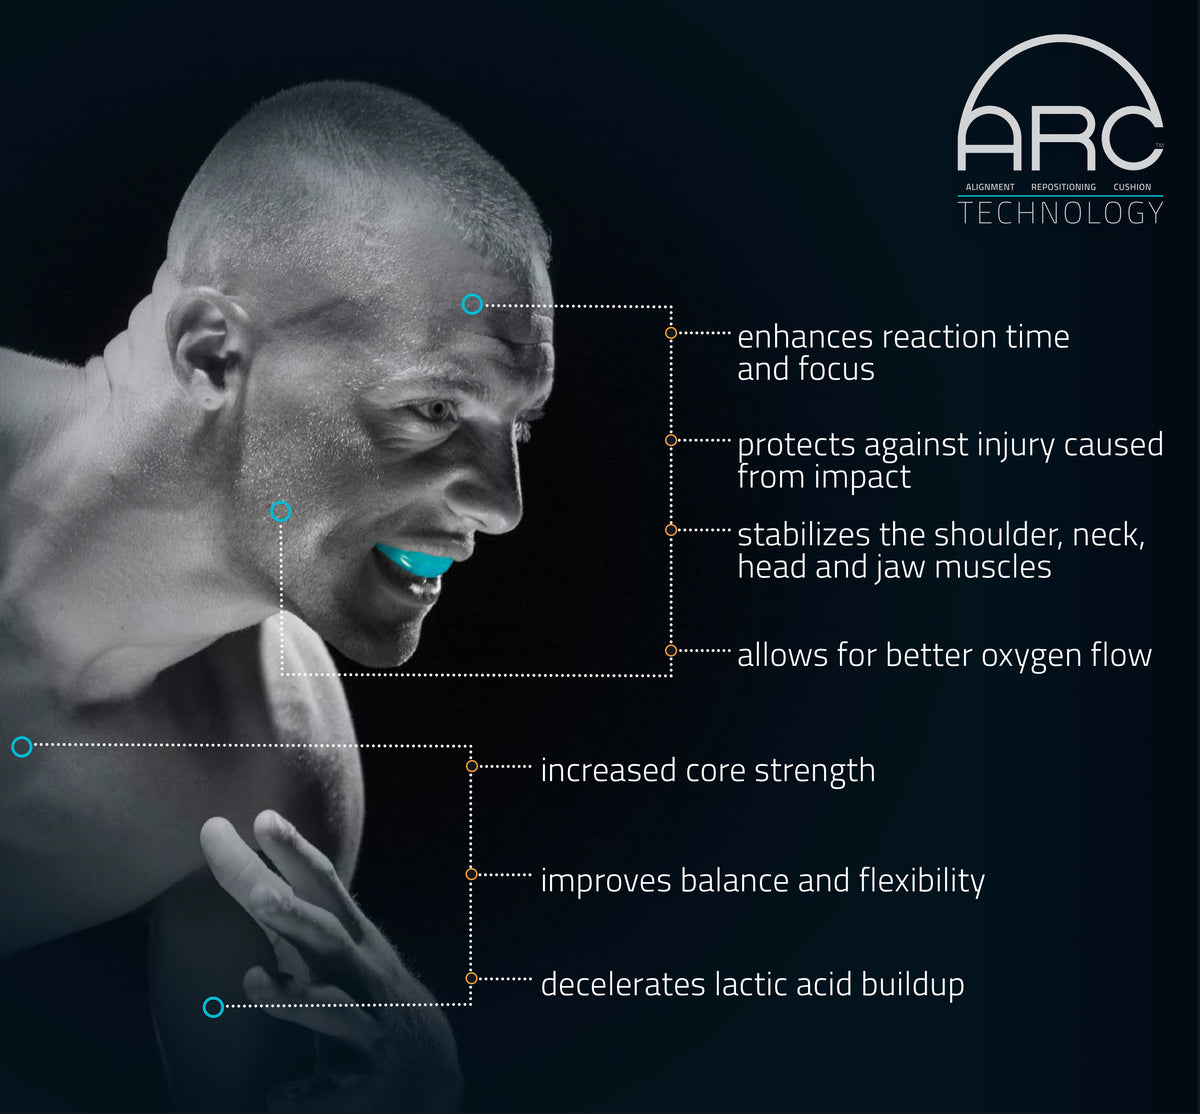 ARC technology, enhances reaction time and focus, protects against caused, stabilizes the shoulder neck head and jaw muscles, allow for the better oxygen flow, increased core strength, improved core strength, improve balance and flexibility, decelerates lactic acid buildup